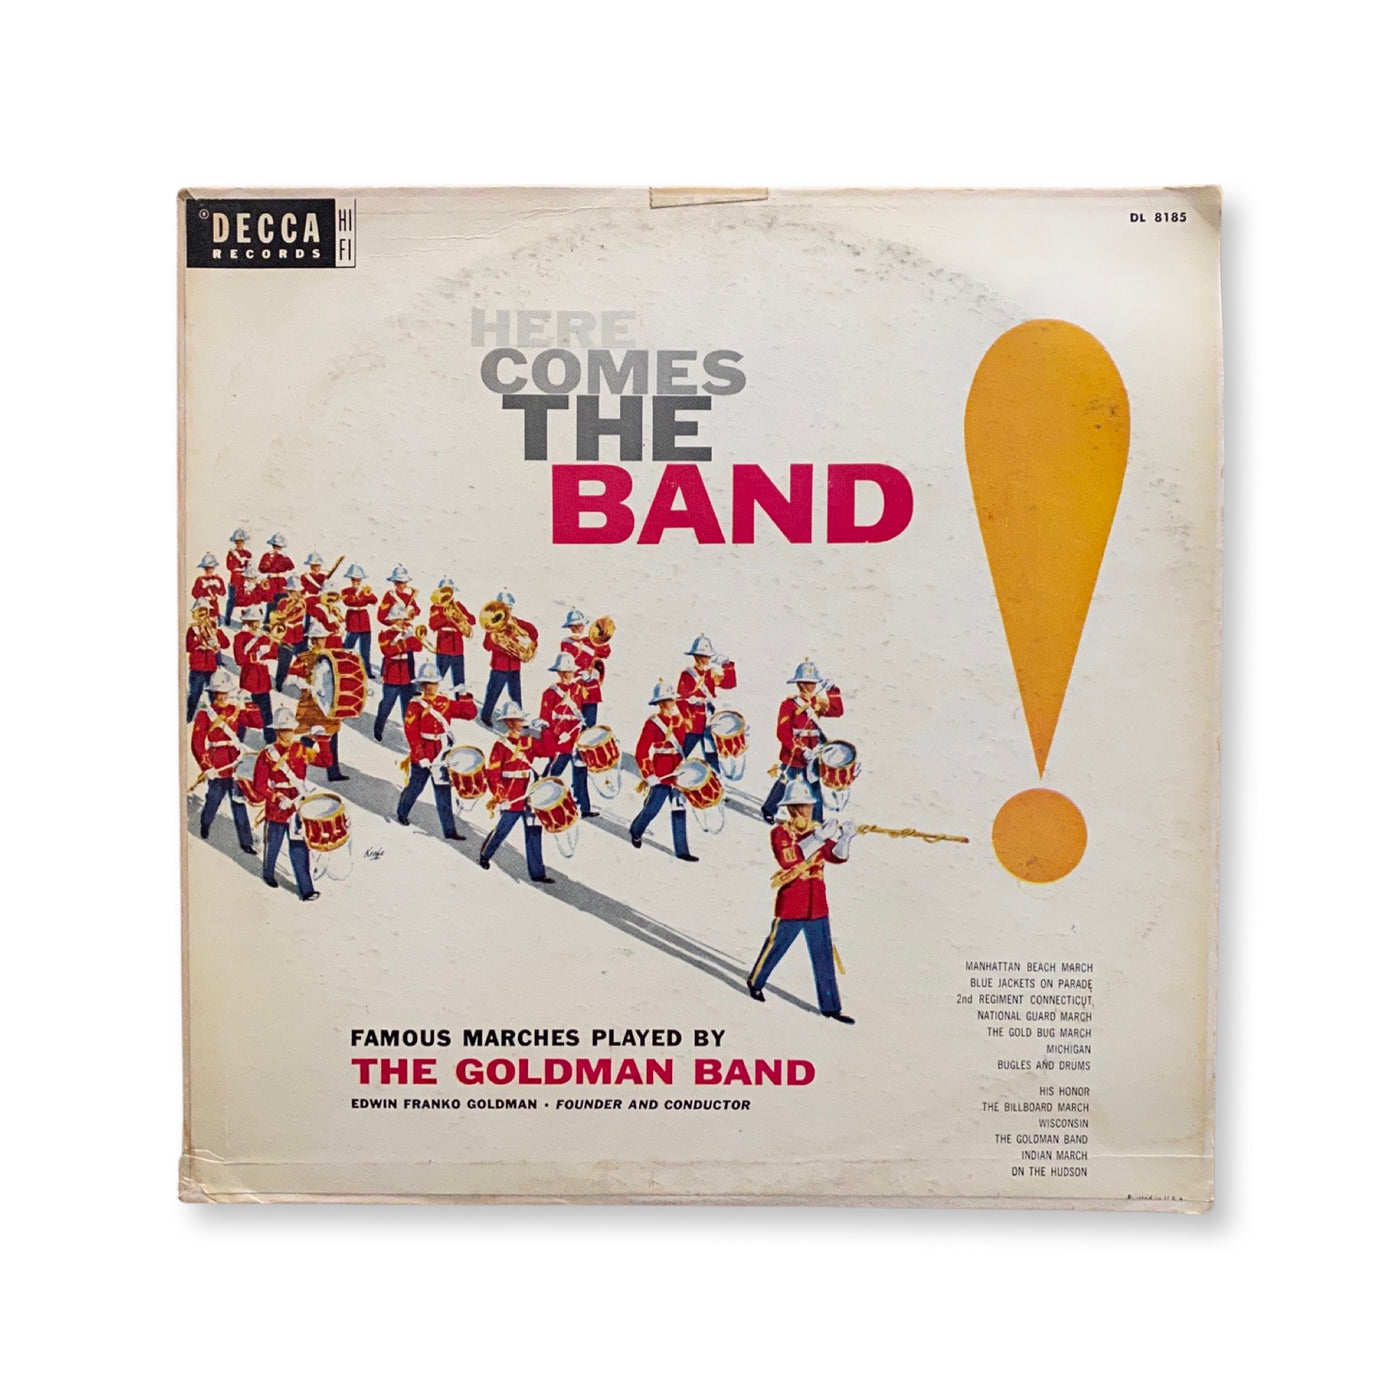 The Goldman Band - Here Comes The Band